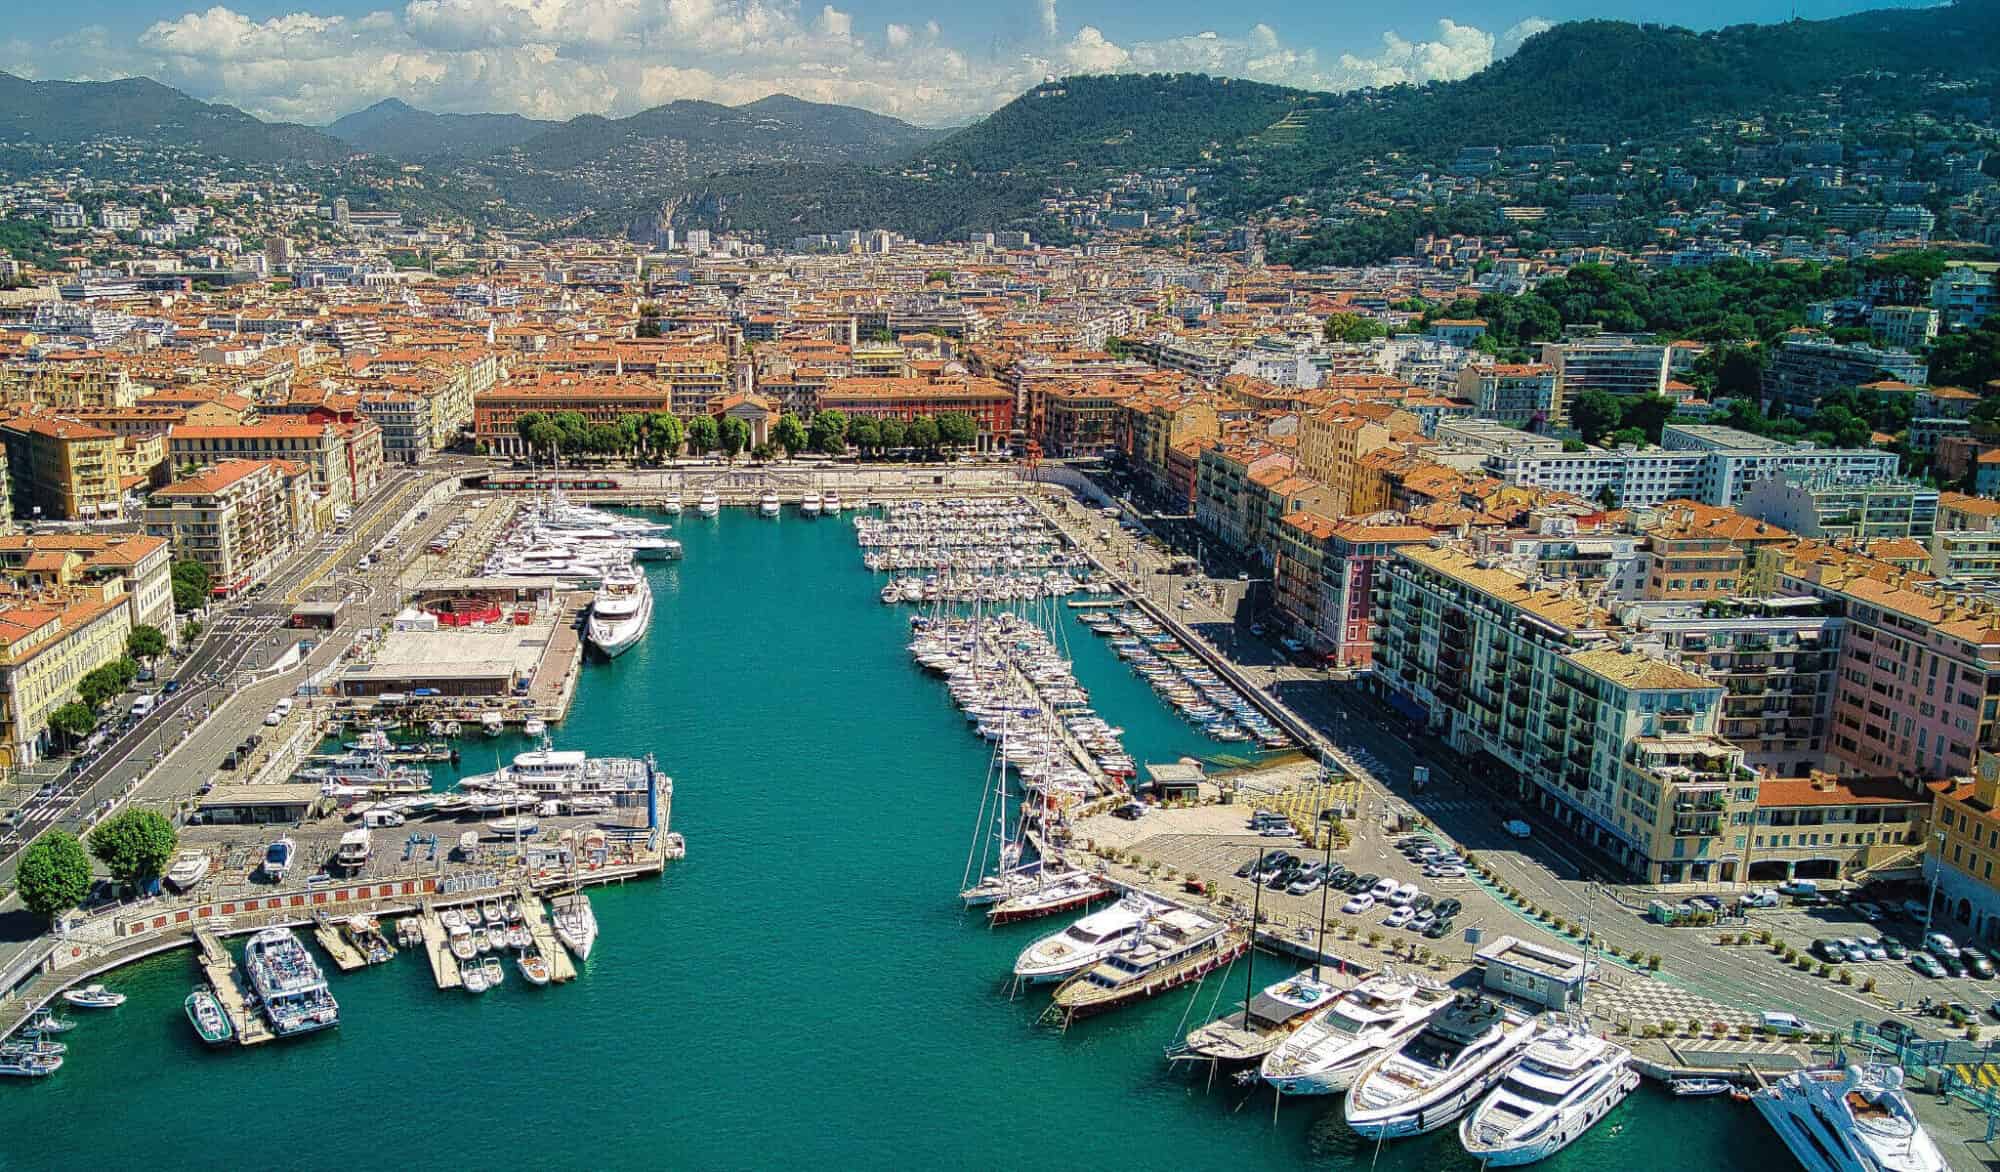 An aerial view of Nice's harbor with boats in dock. The water is a brilliant blue and the sun is shining.